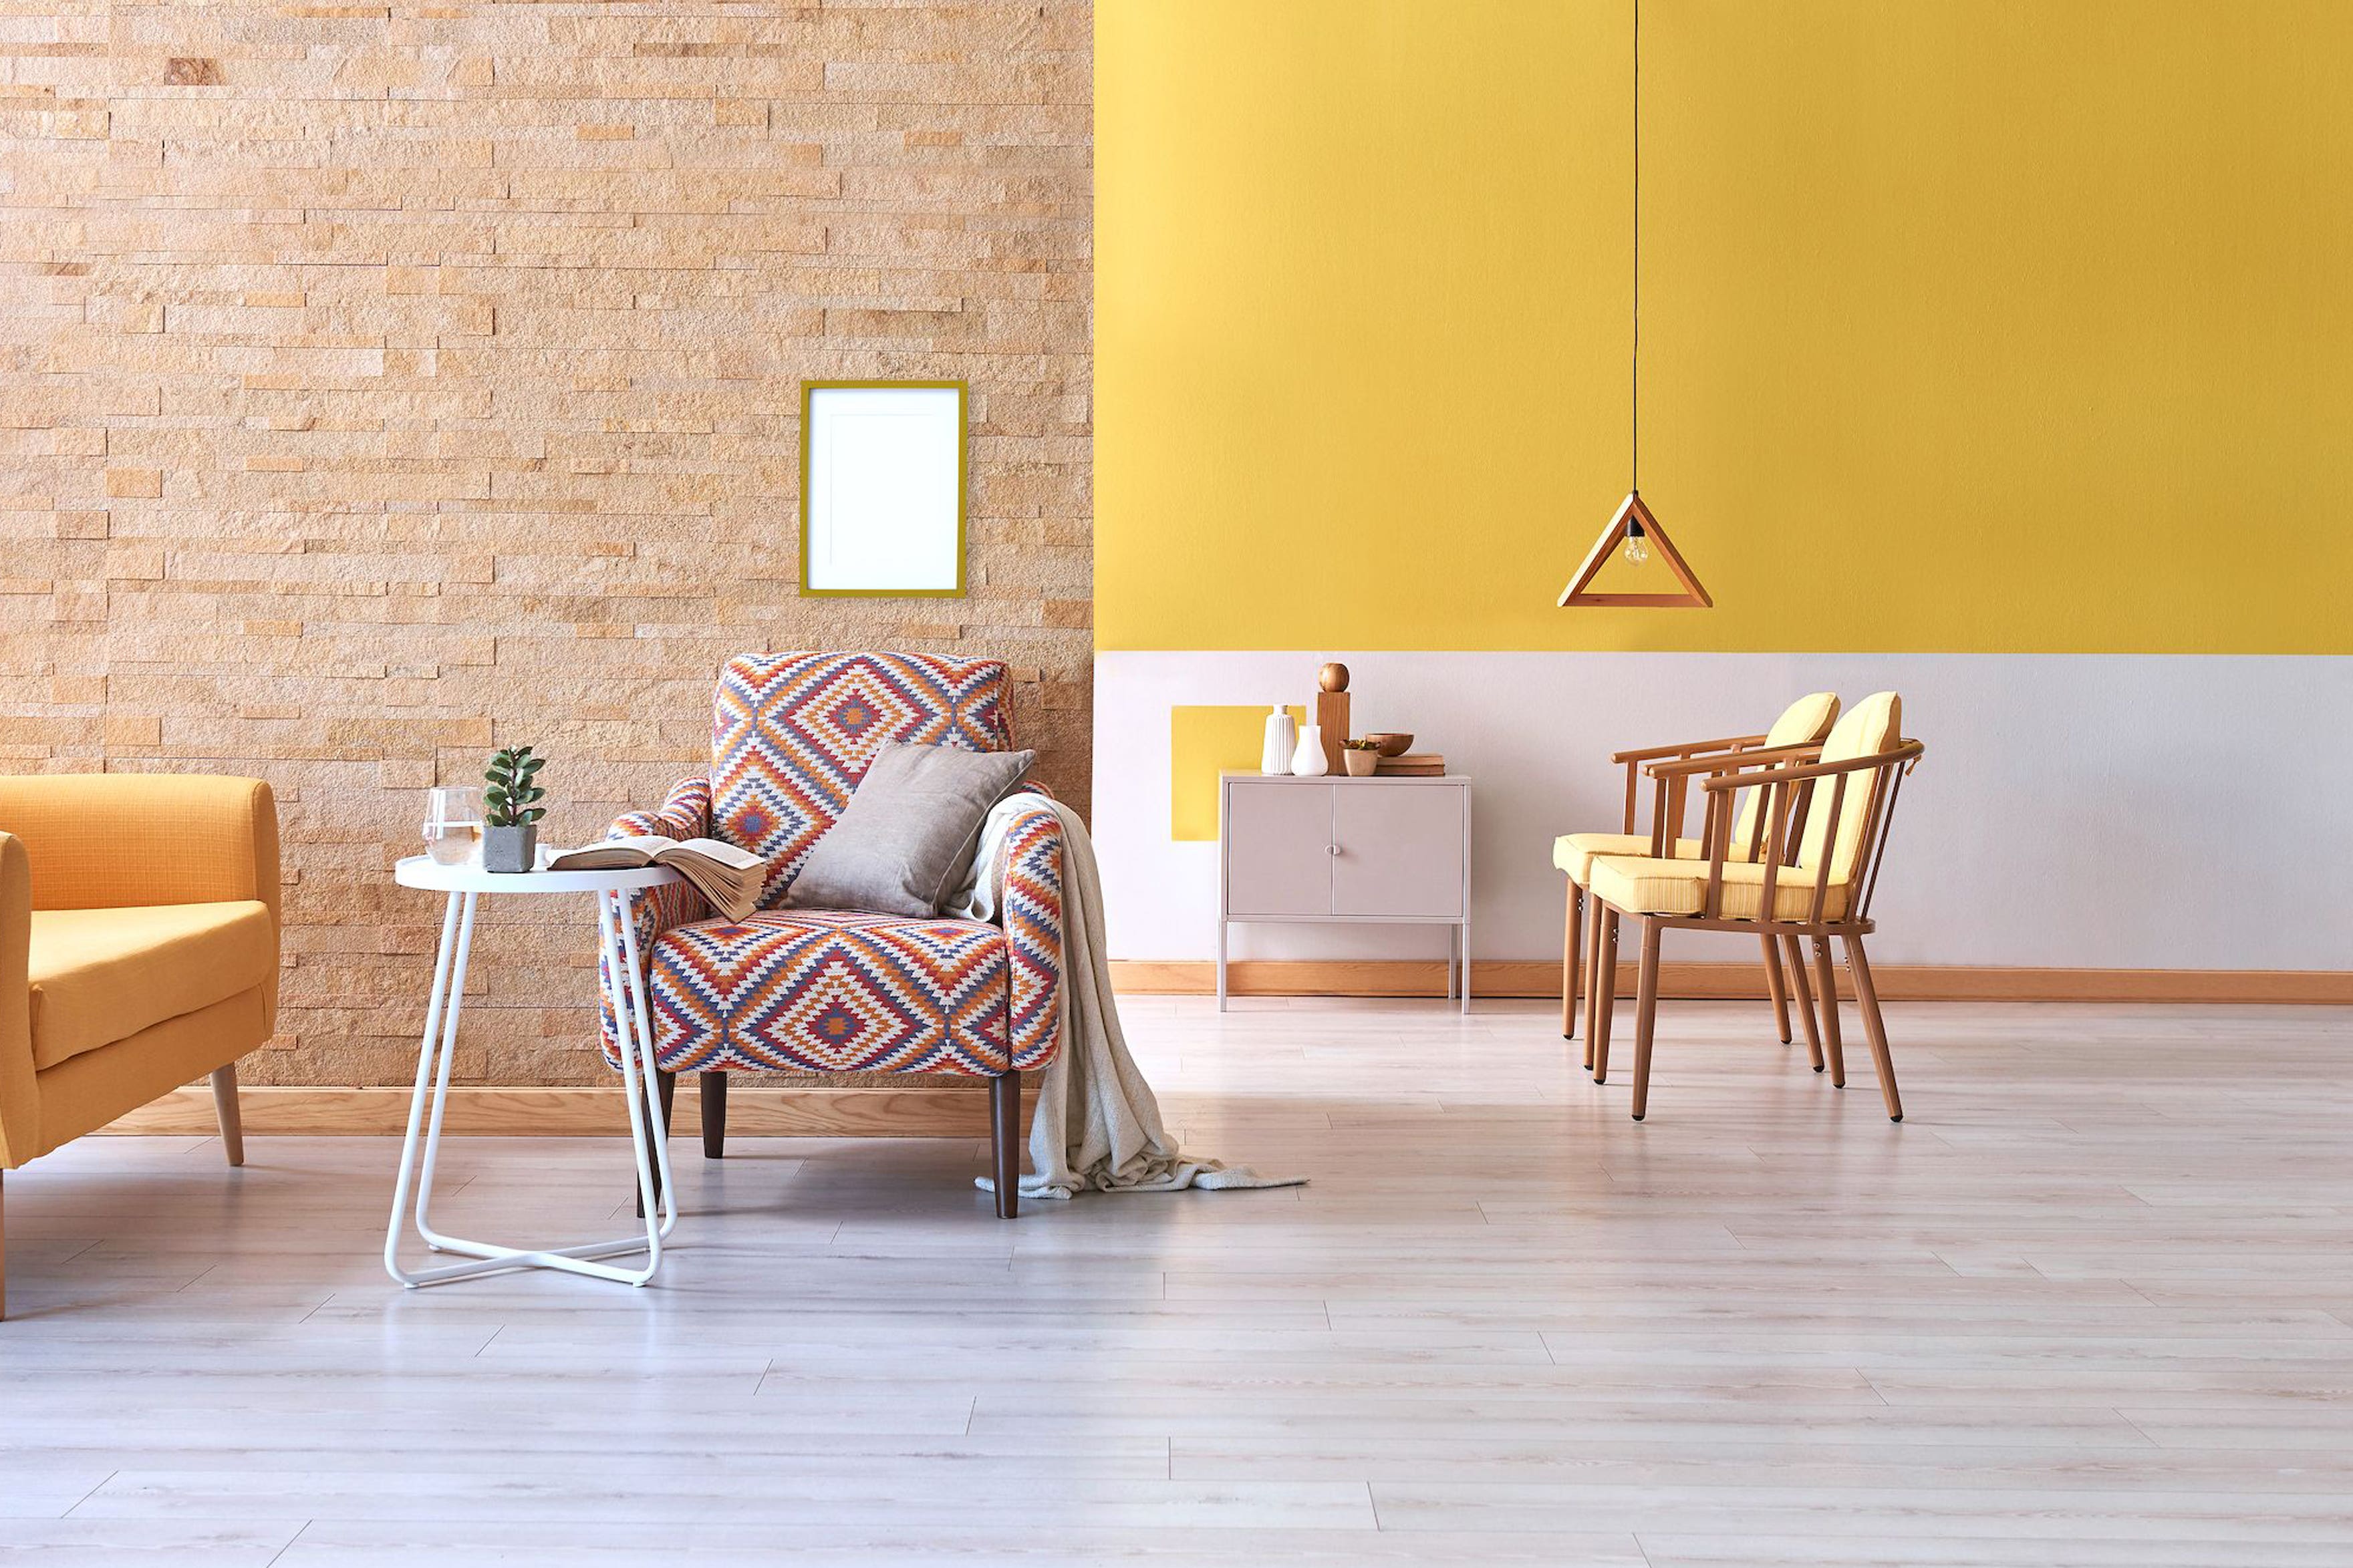 12 Elegant Mustard Yellow Sofas & Chairs For A Pop Of Color